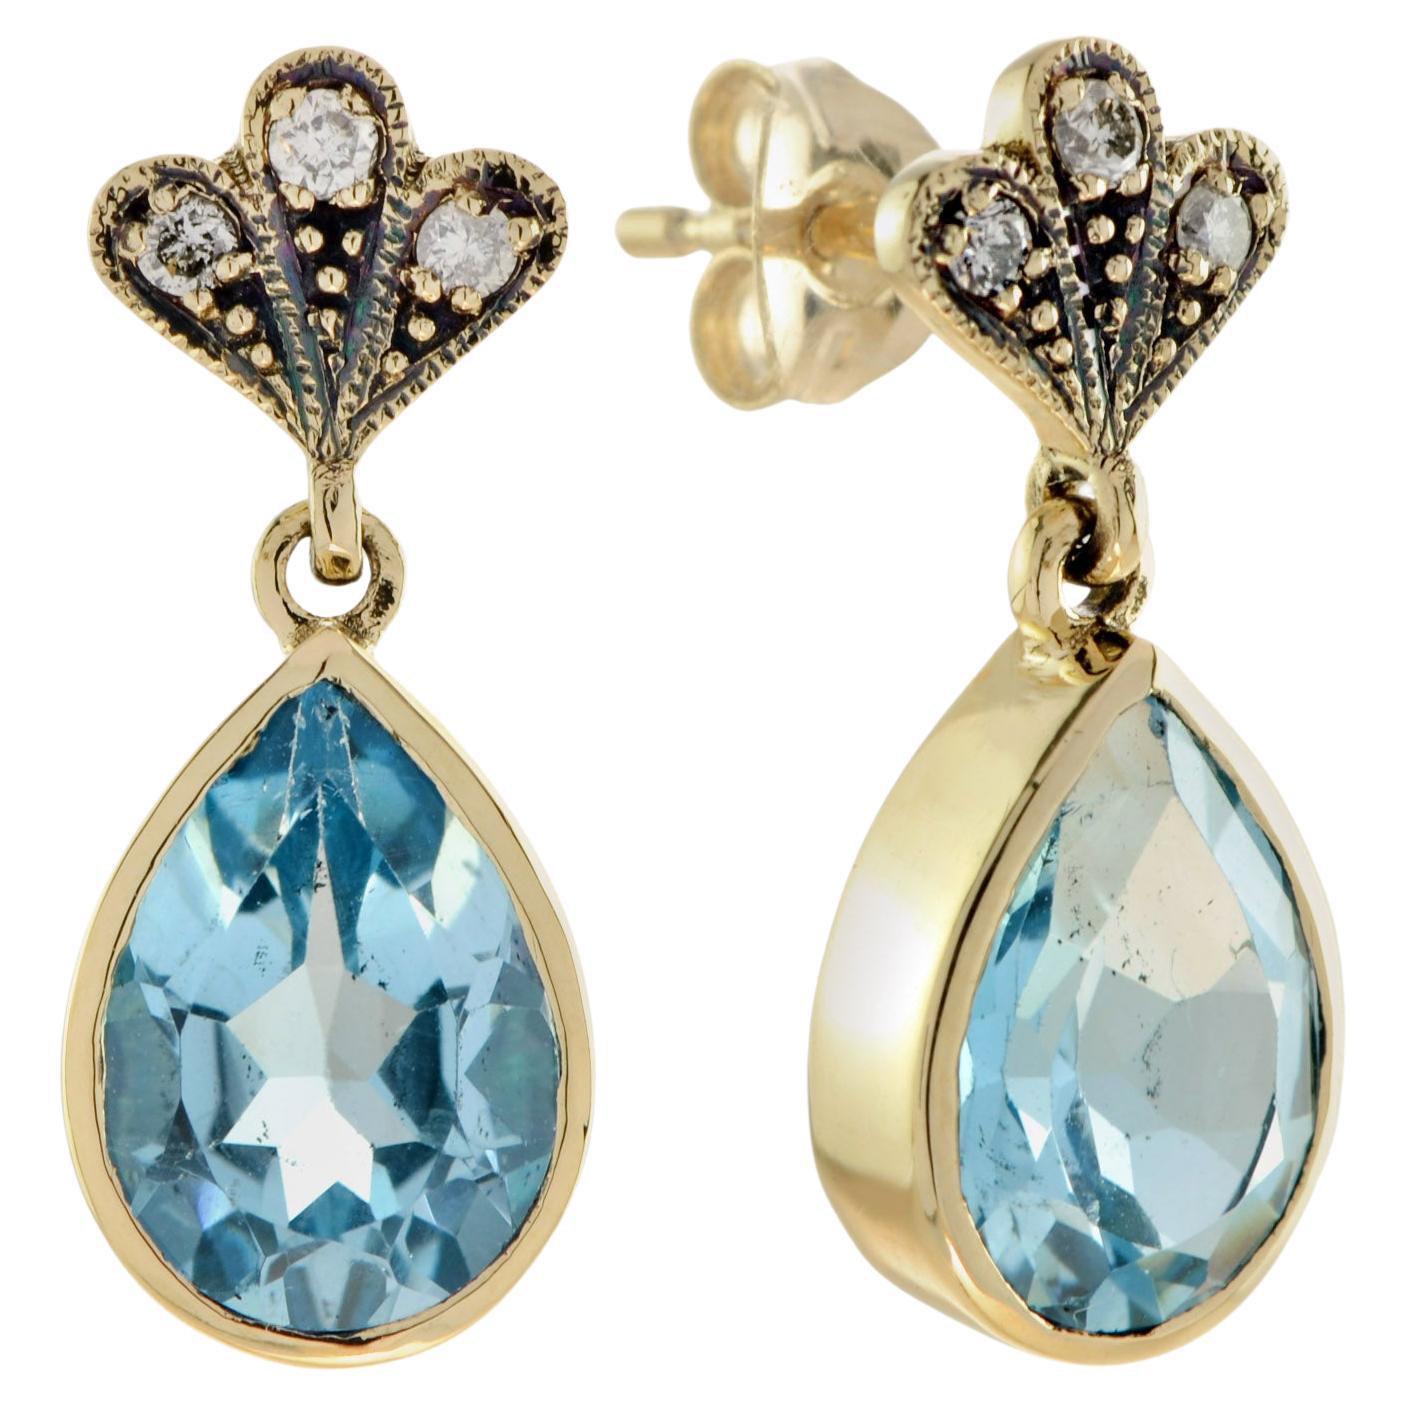 Vintage Style Blue Topaz and Diamond Drop Earrings in 9k Yellow Gold